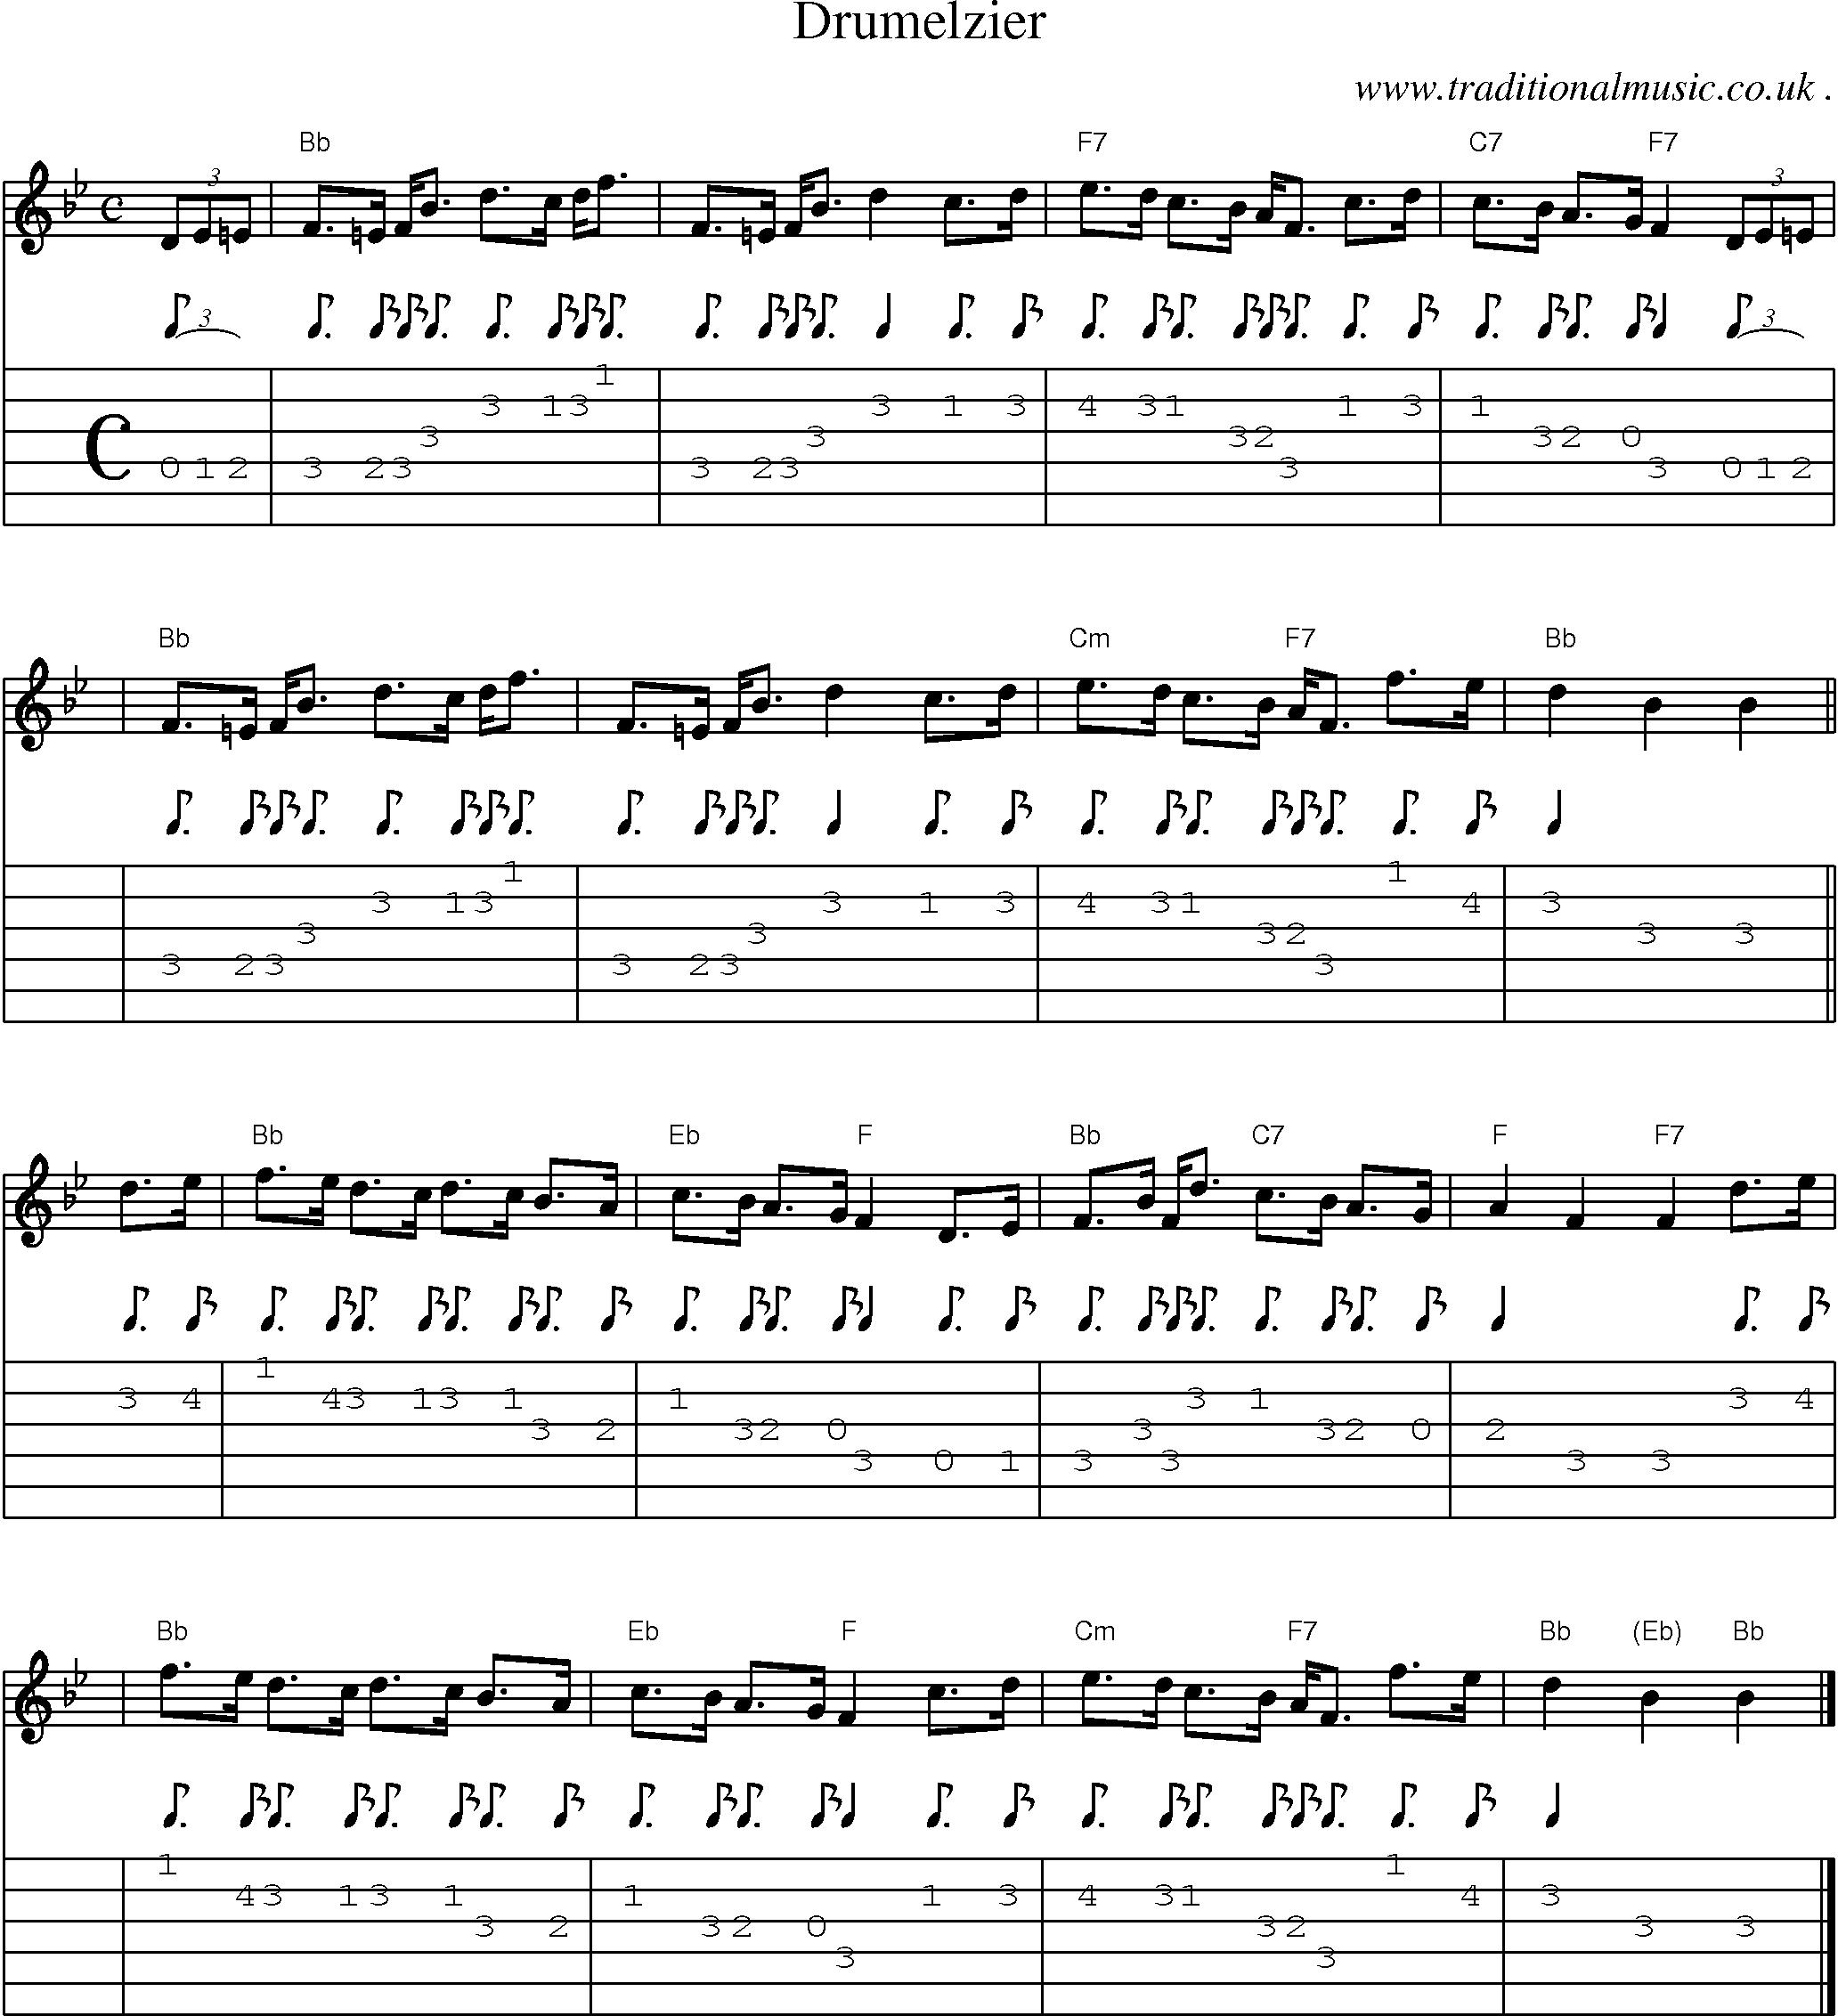 Sheet-music  score, Chords and Guitar Tabs for Drumelzier